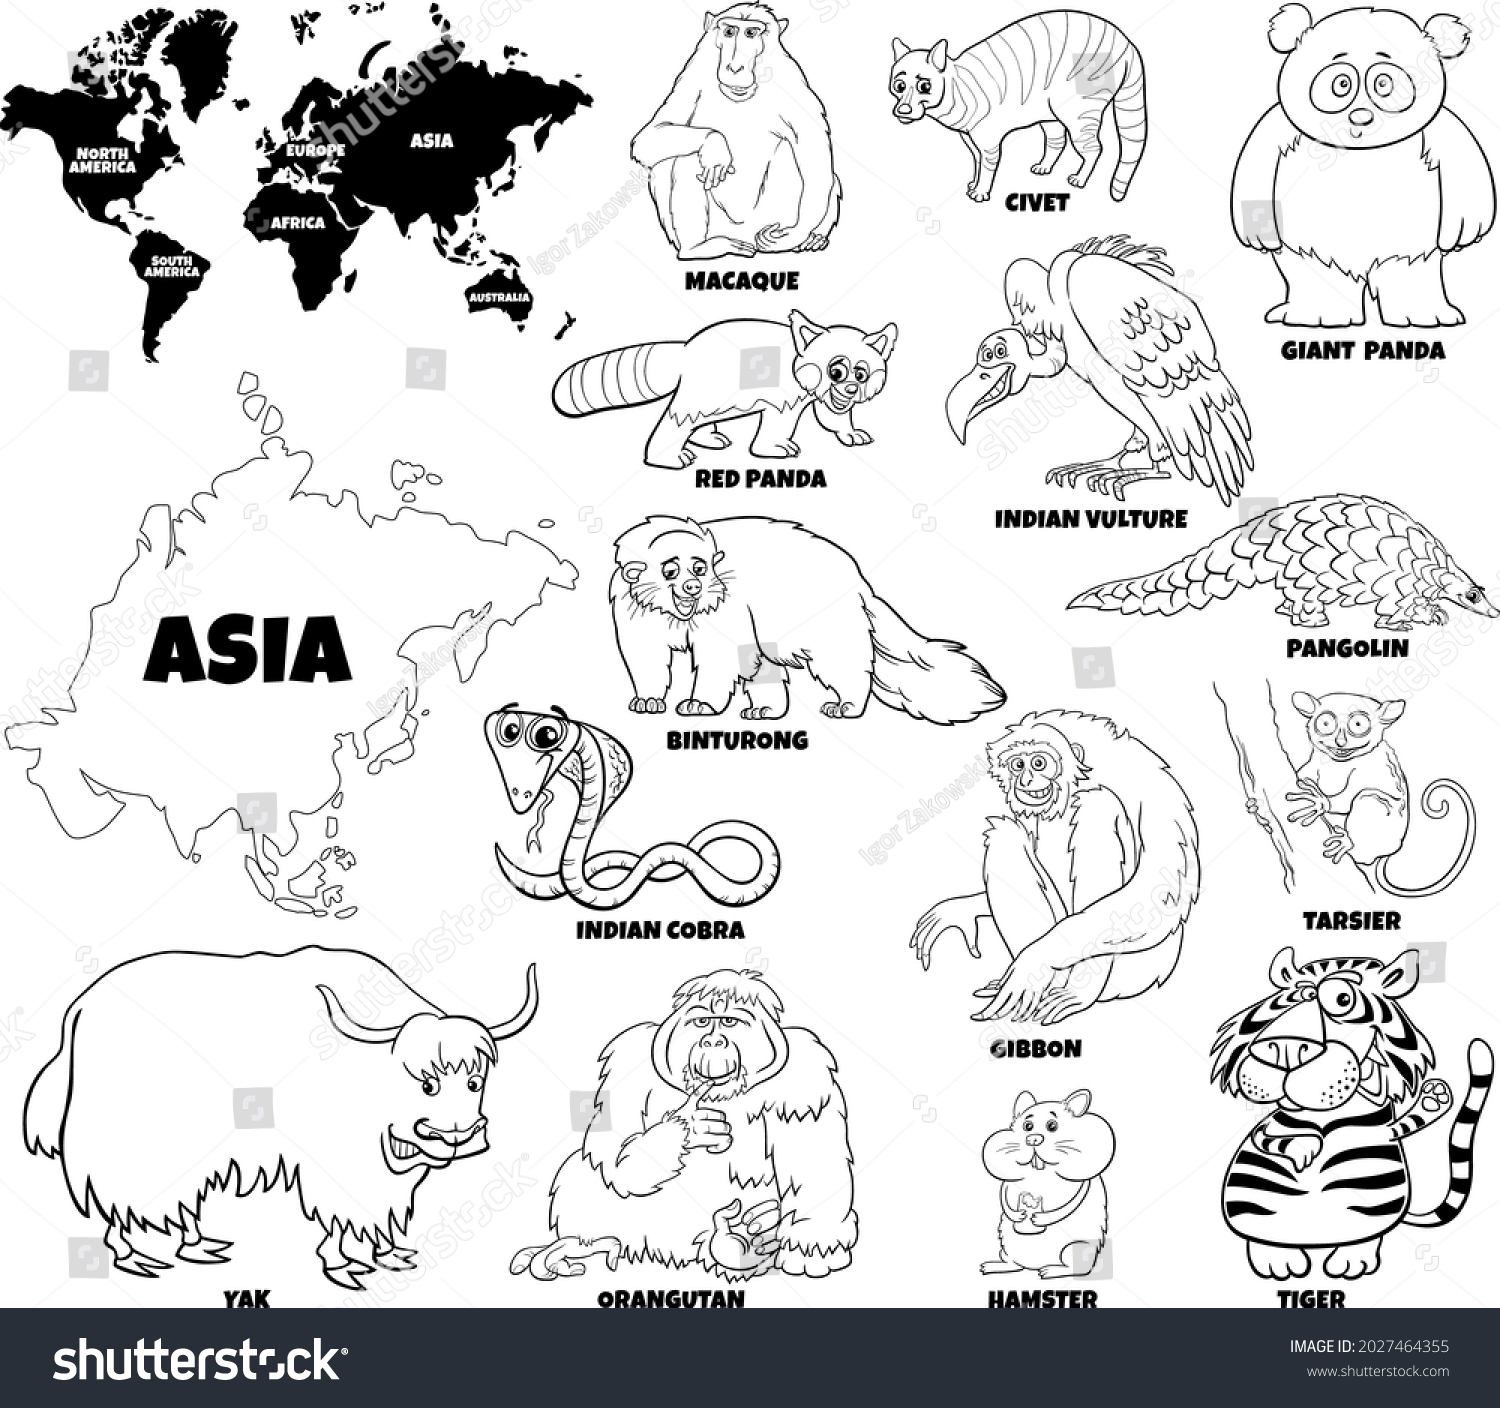 SVG of Black and white educational cartoon illustration of Asian animal species set and world map with continents shapes coloring book page svg